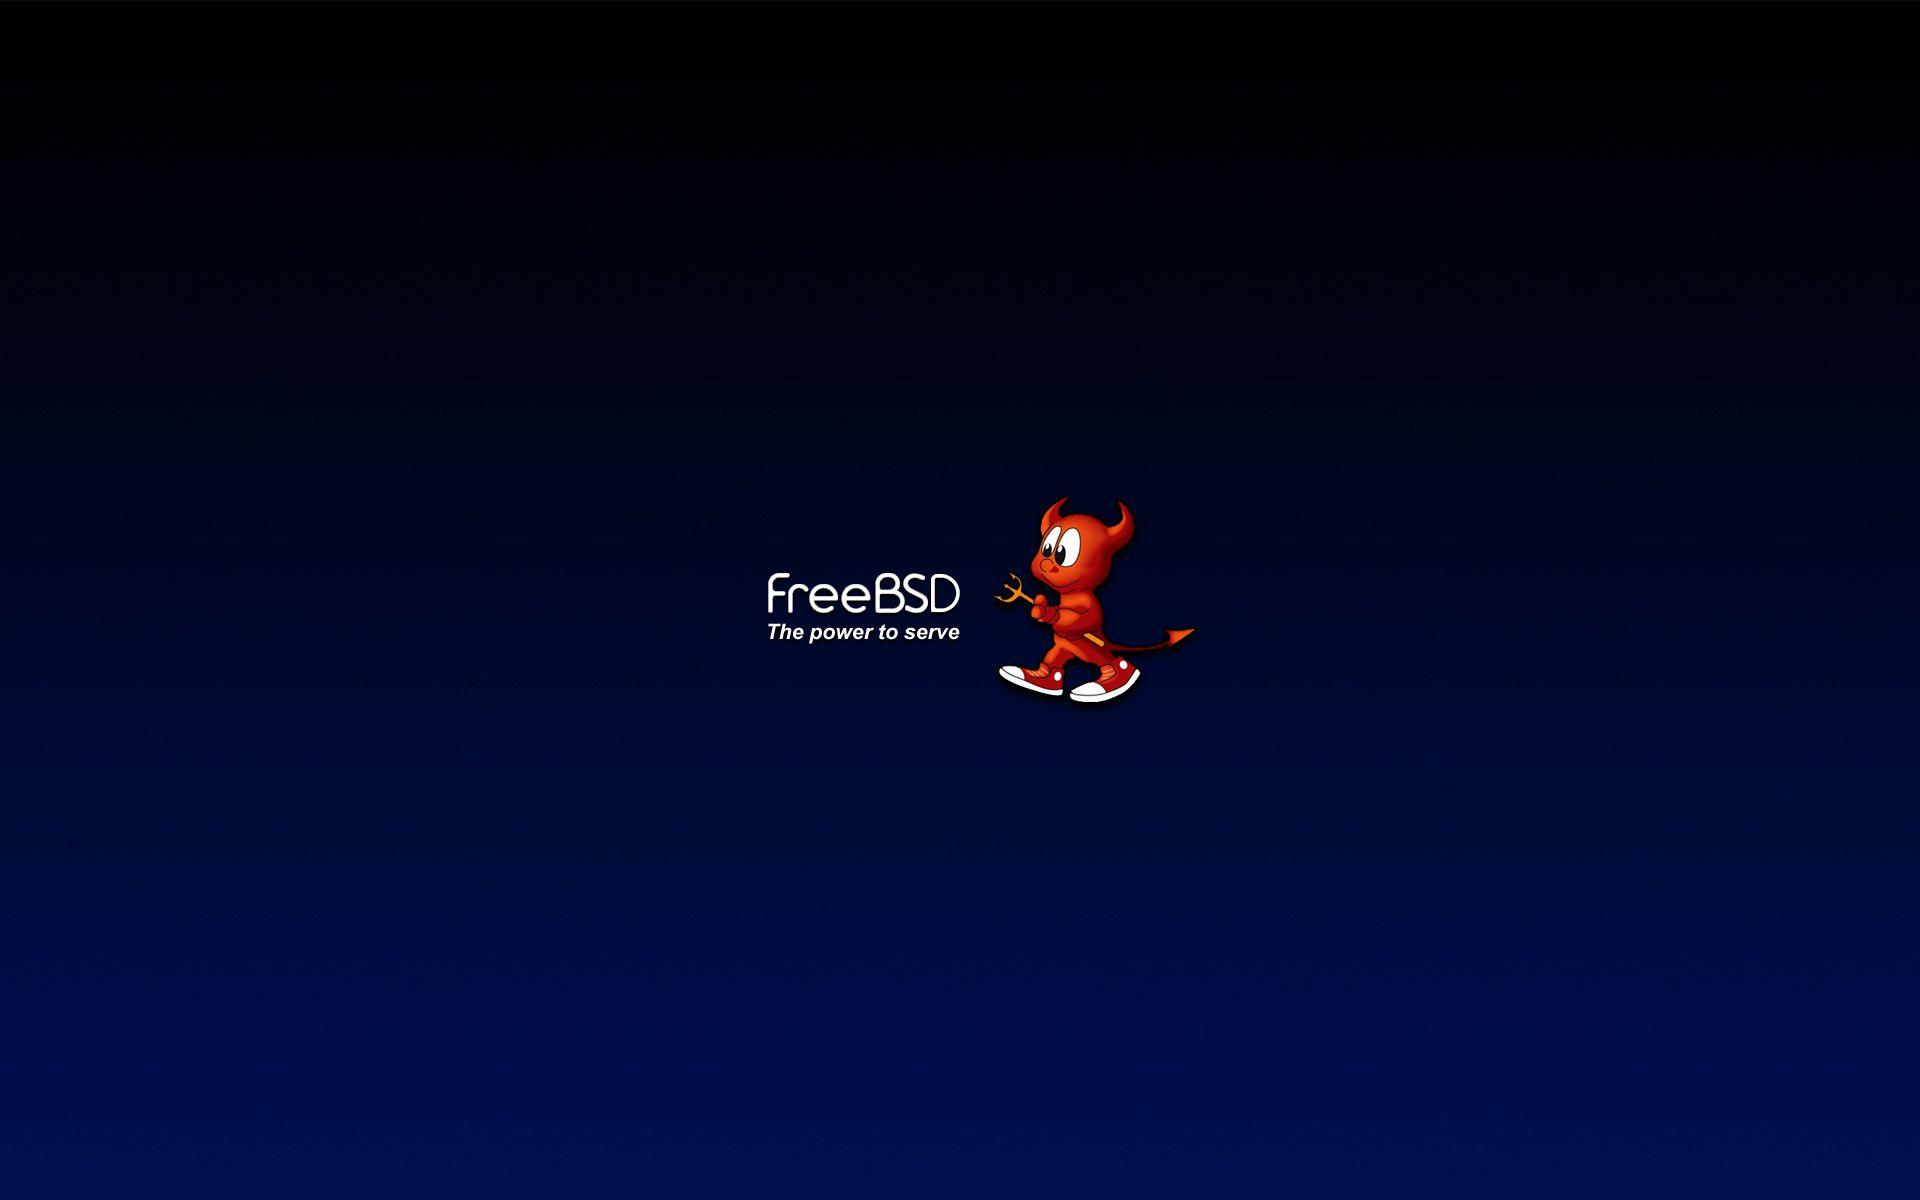 freebsd wallpaper Search Engine